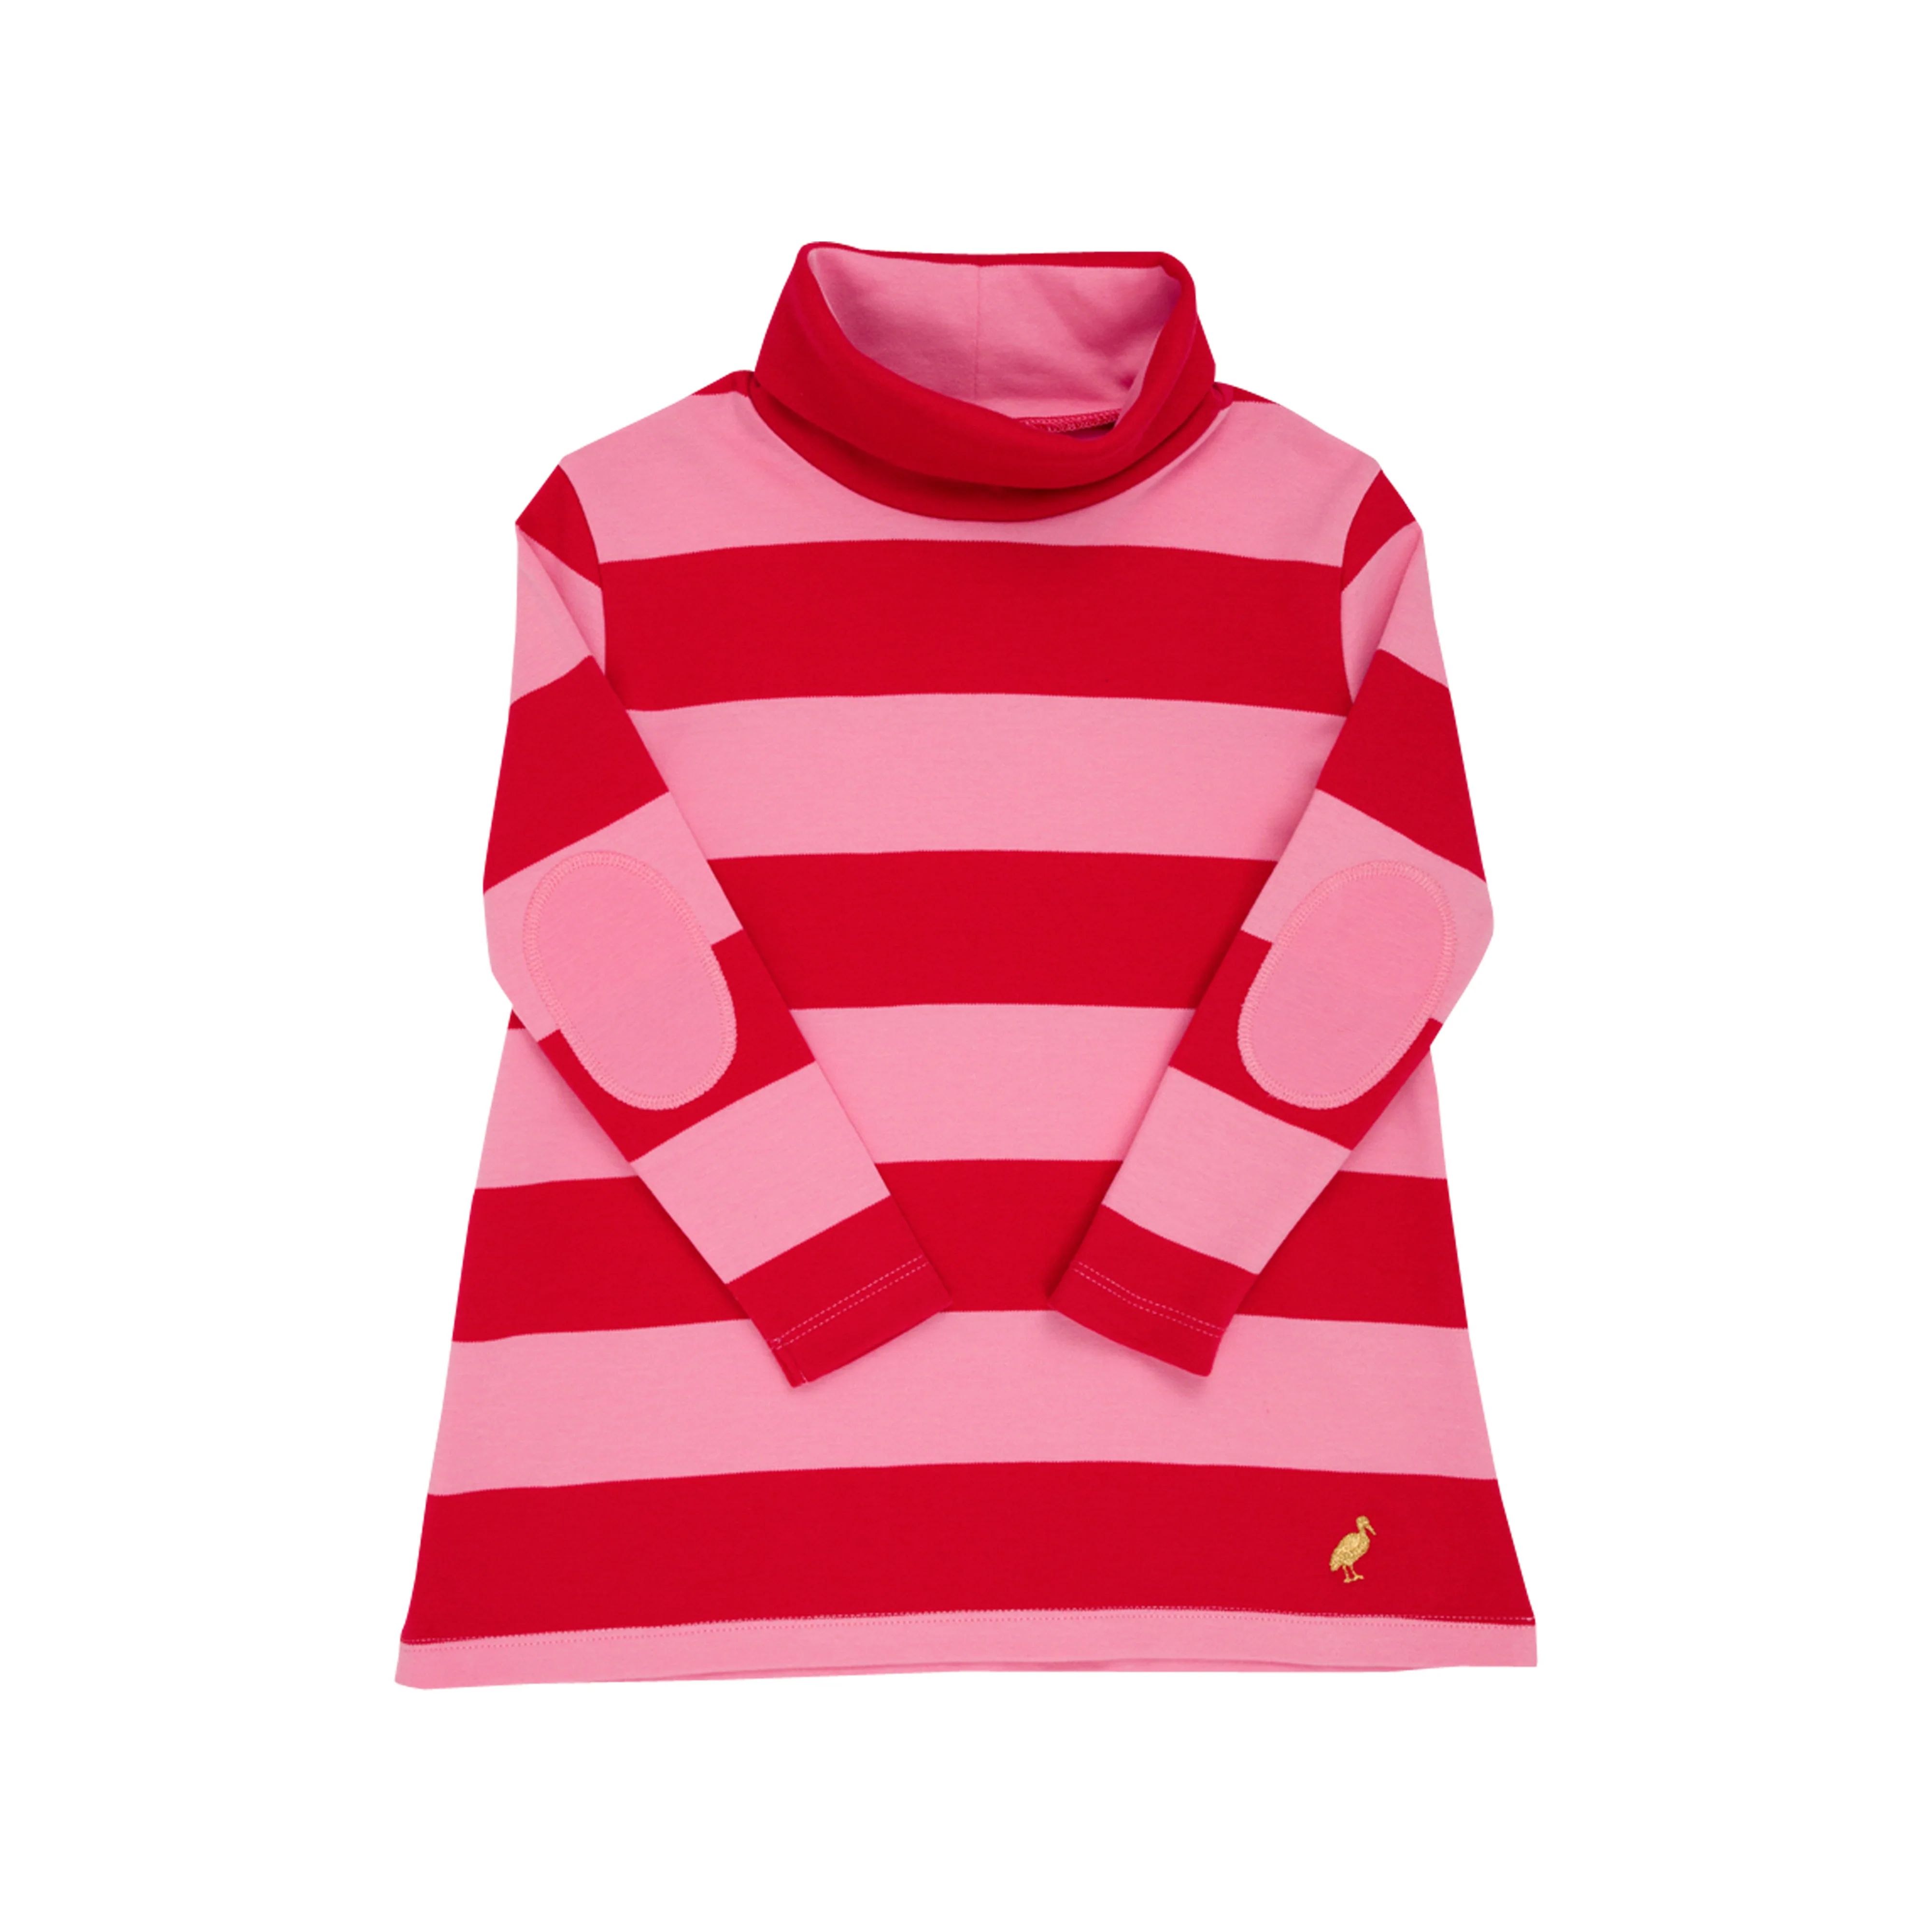 Tenley Tunic - Hamptons Hot Pink & Richmond Red Stripe with Gold Stork | The Beaufort Bonnet Company